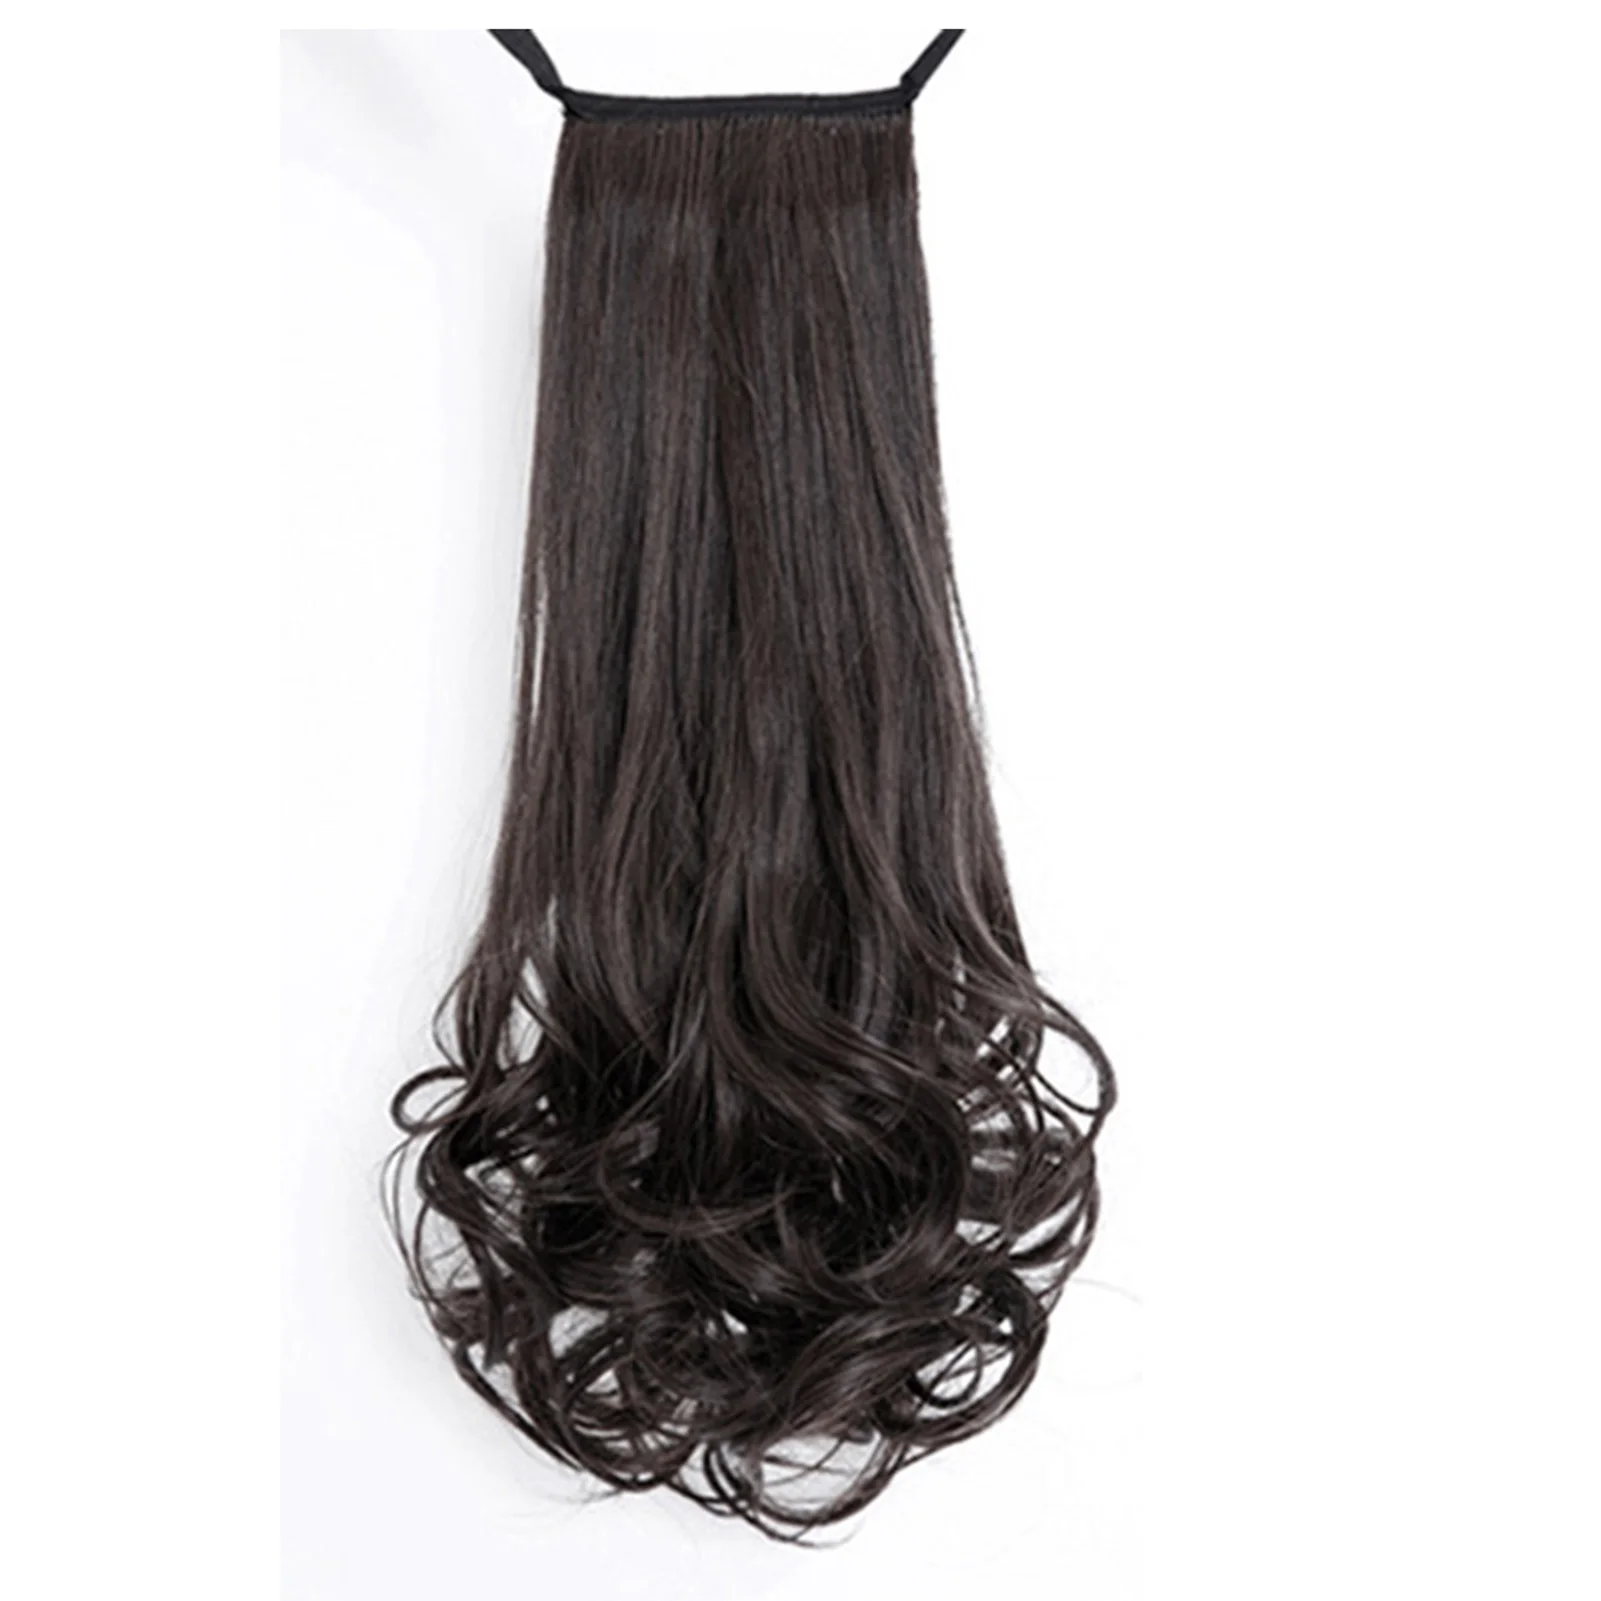 

Wavy Design Curly Hair Ponytail Extension Natural Realistic Invisible Wig Piece for Cosplay Stage Performance C44